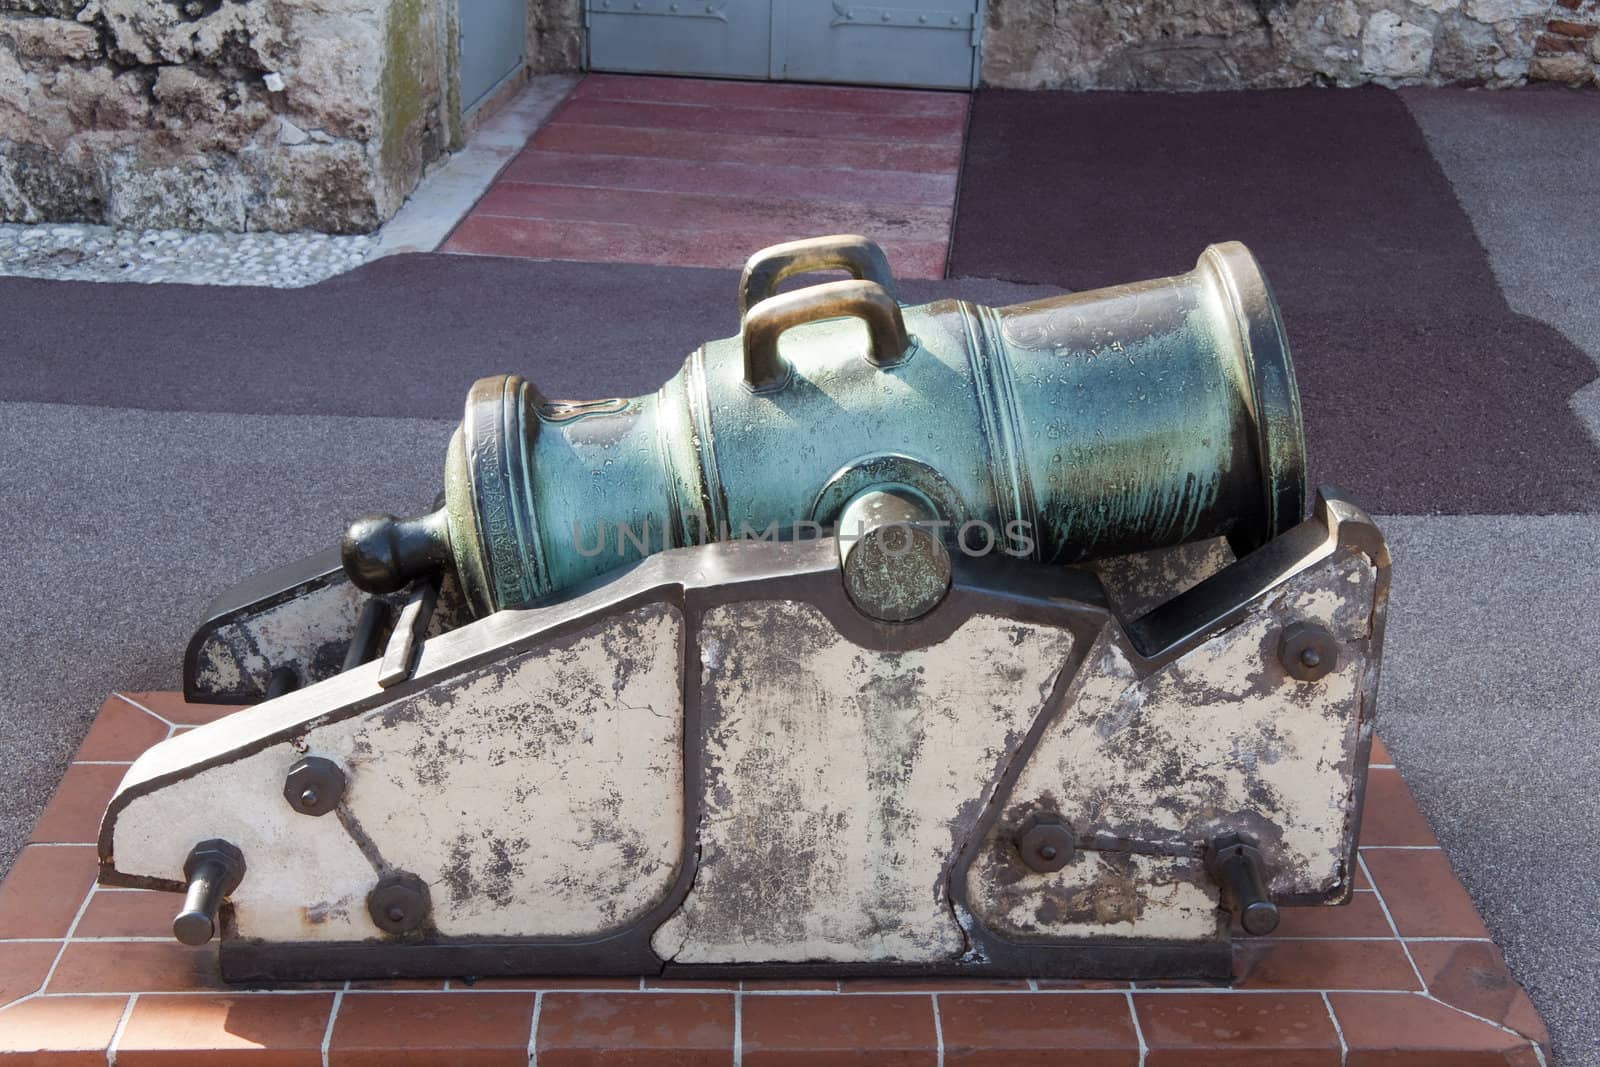 An old bronze cannon that has tarnished